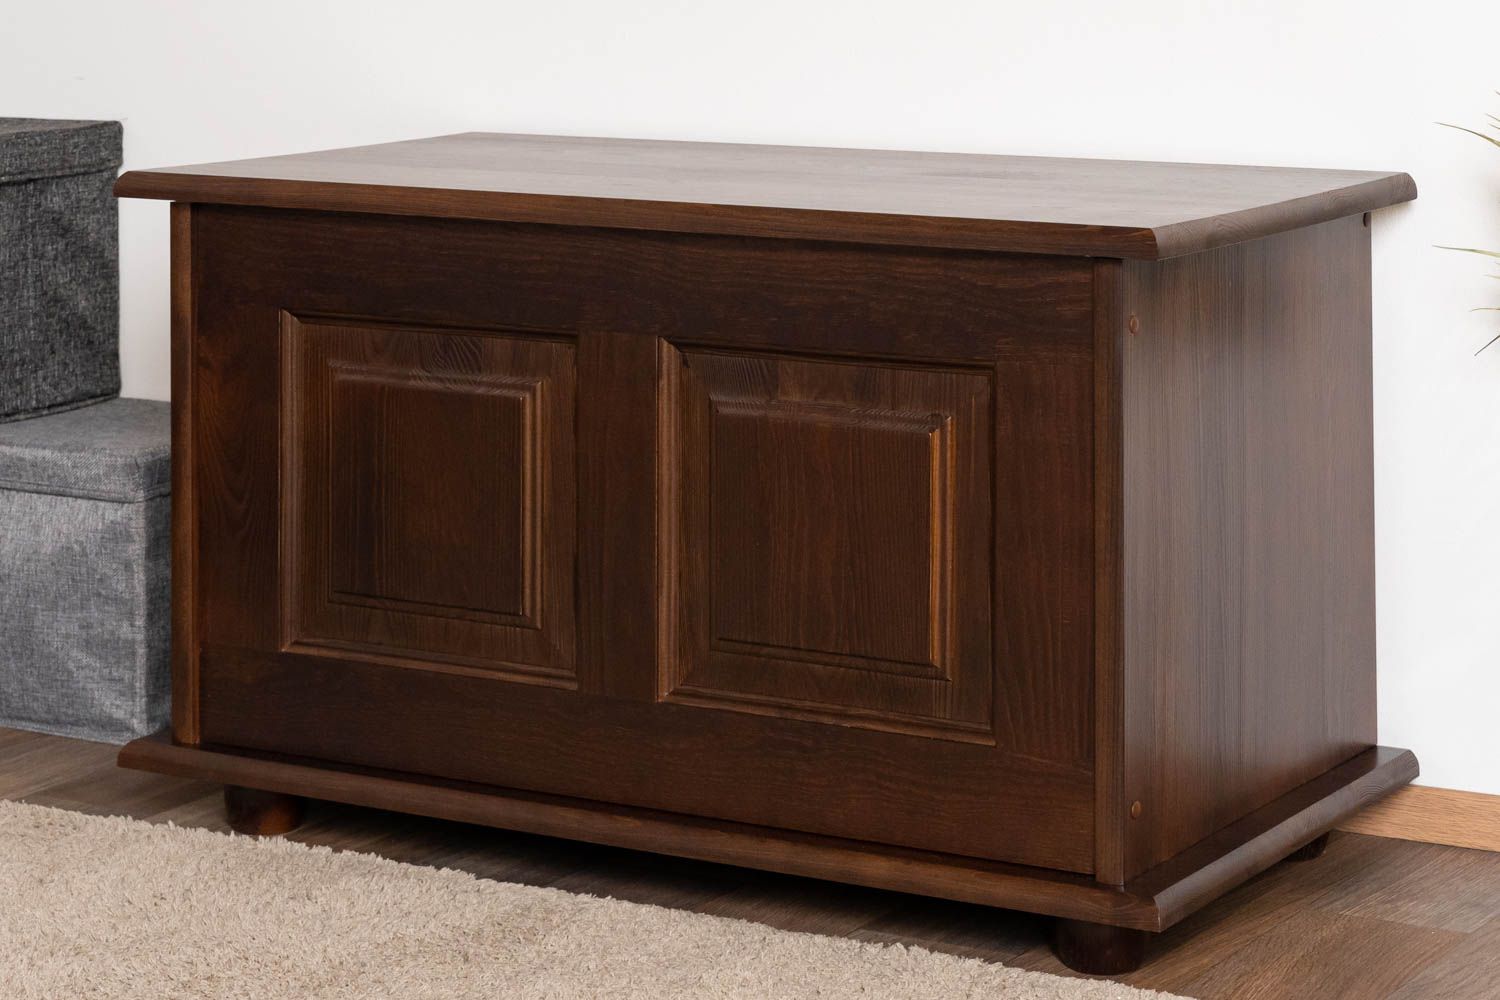 Solid chest / crate made of pine solid wood walnut color lacquered 181, long life, 50 x 87 x 46 cm, very good workmanship